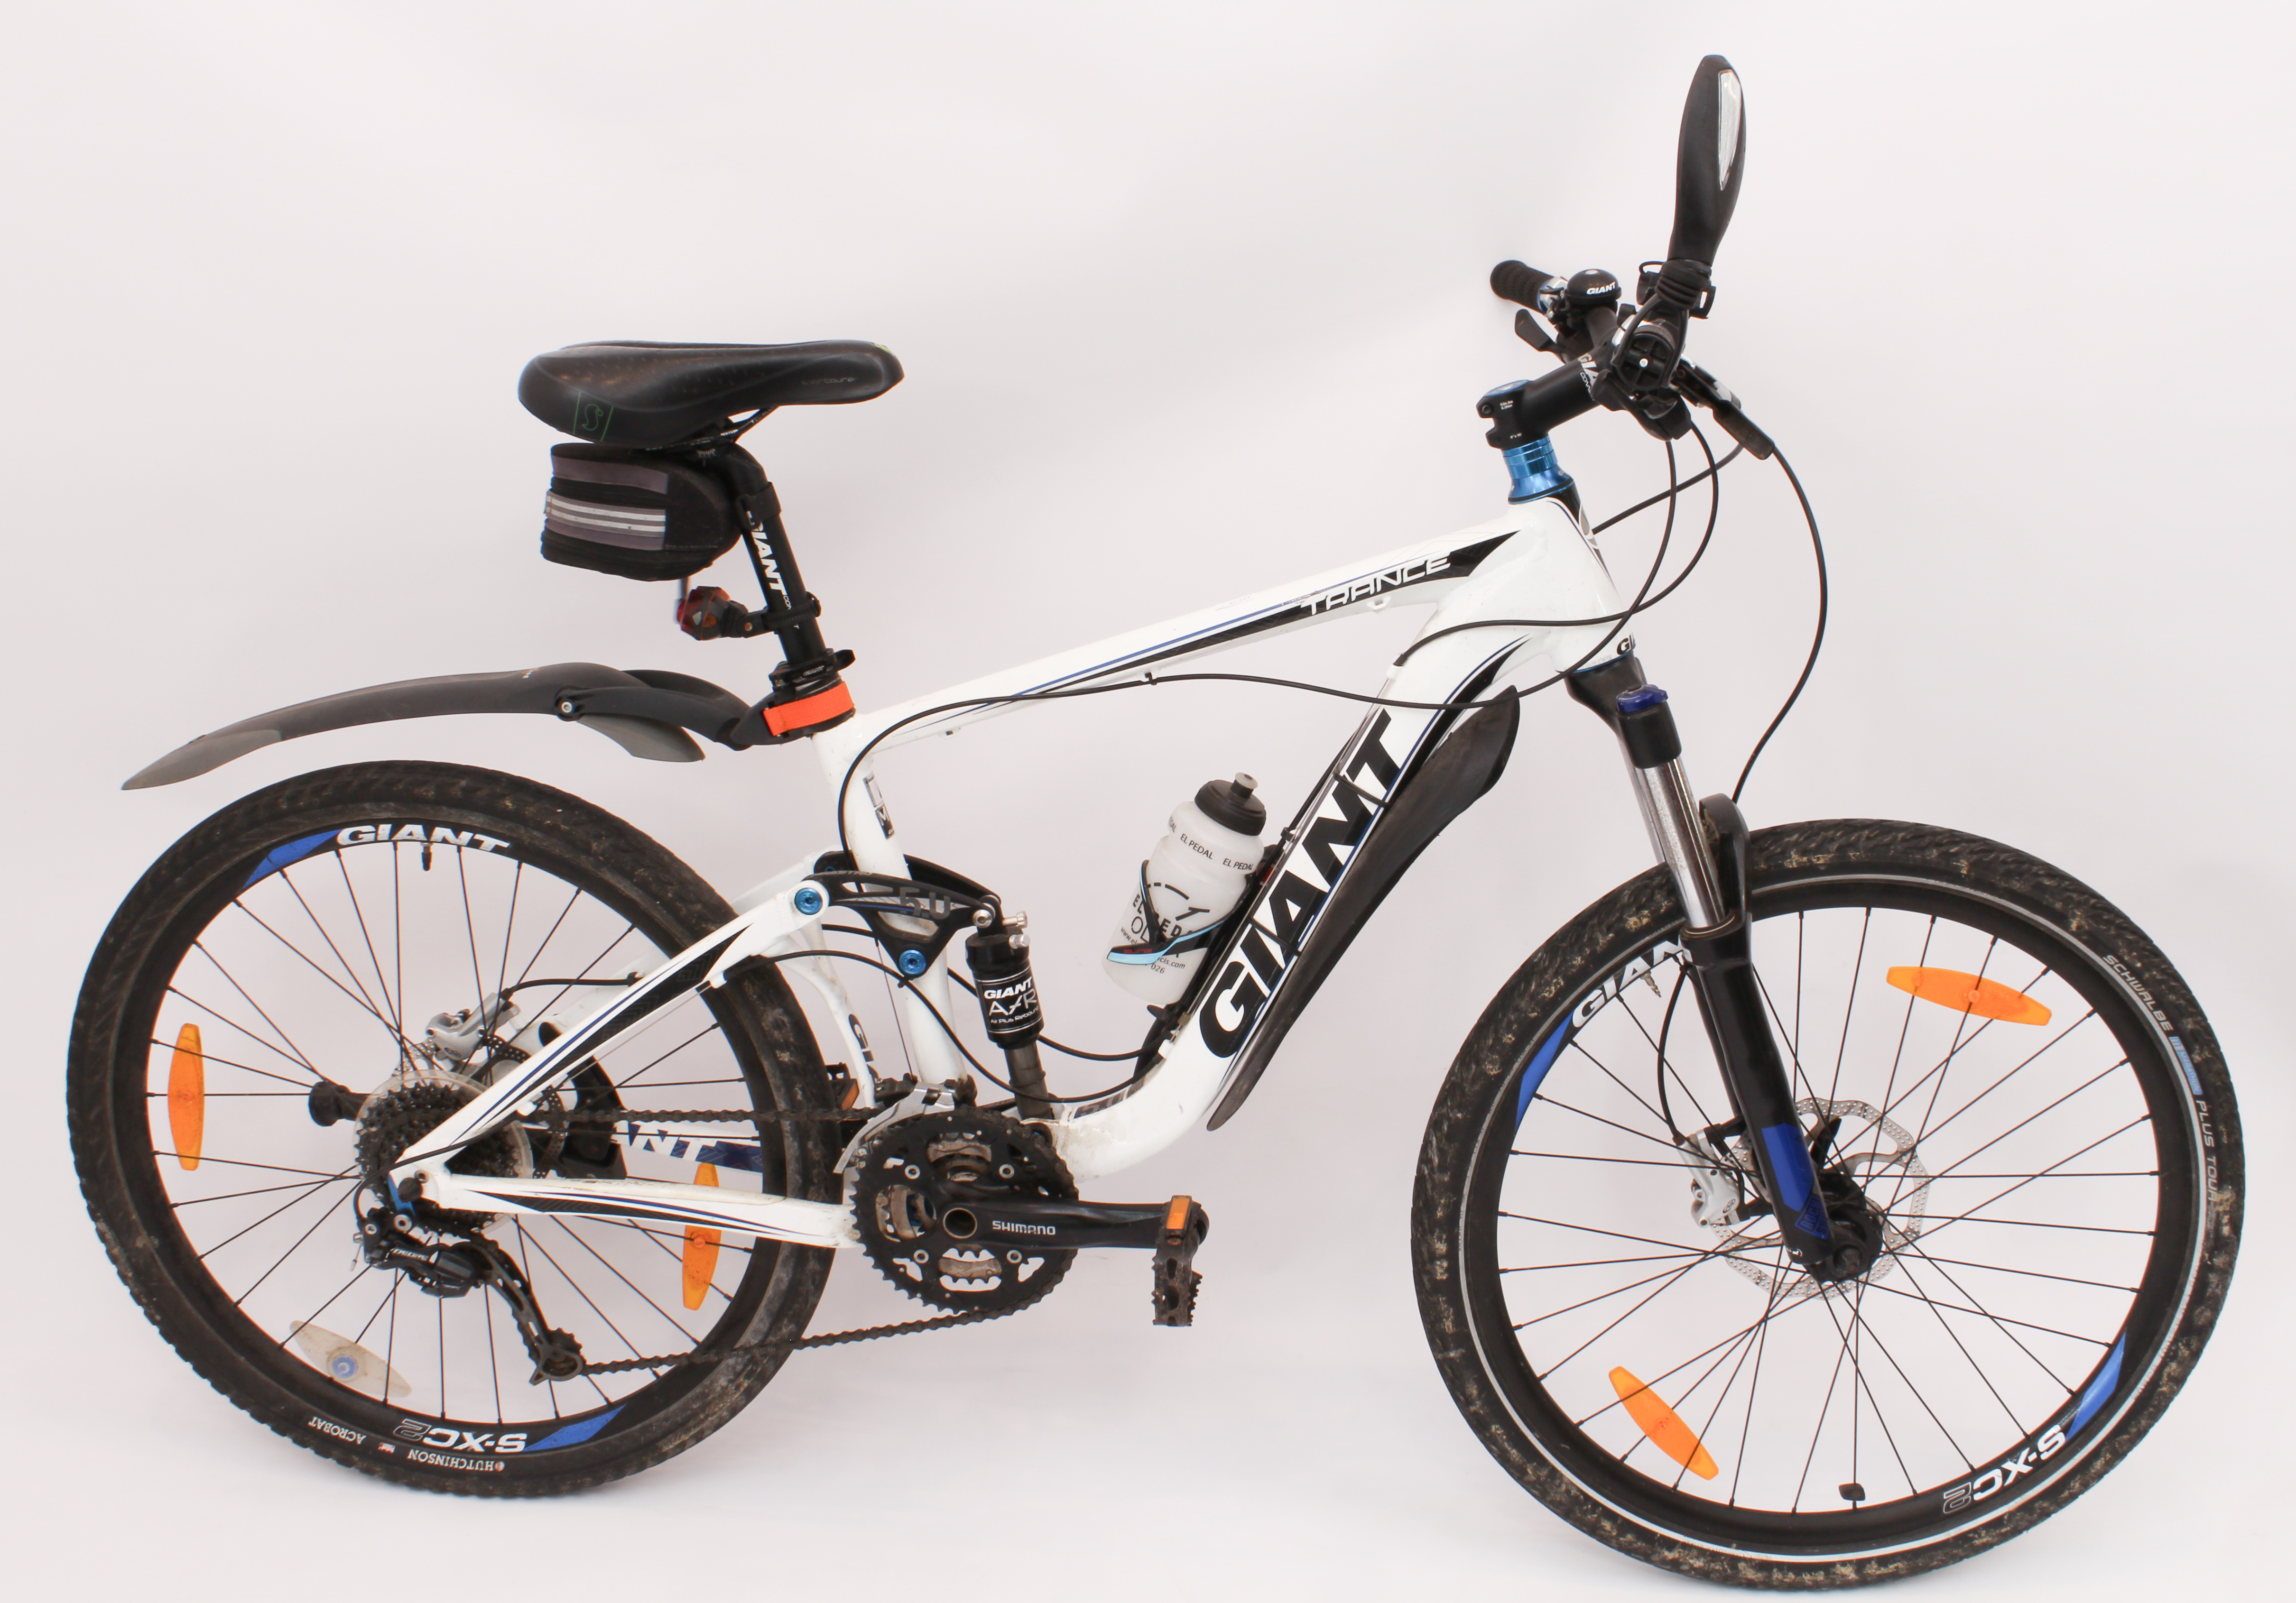 A white Giant 'Trance' full suspension mountain bike complete with two-bike car-rack, cover and